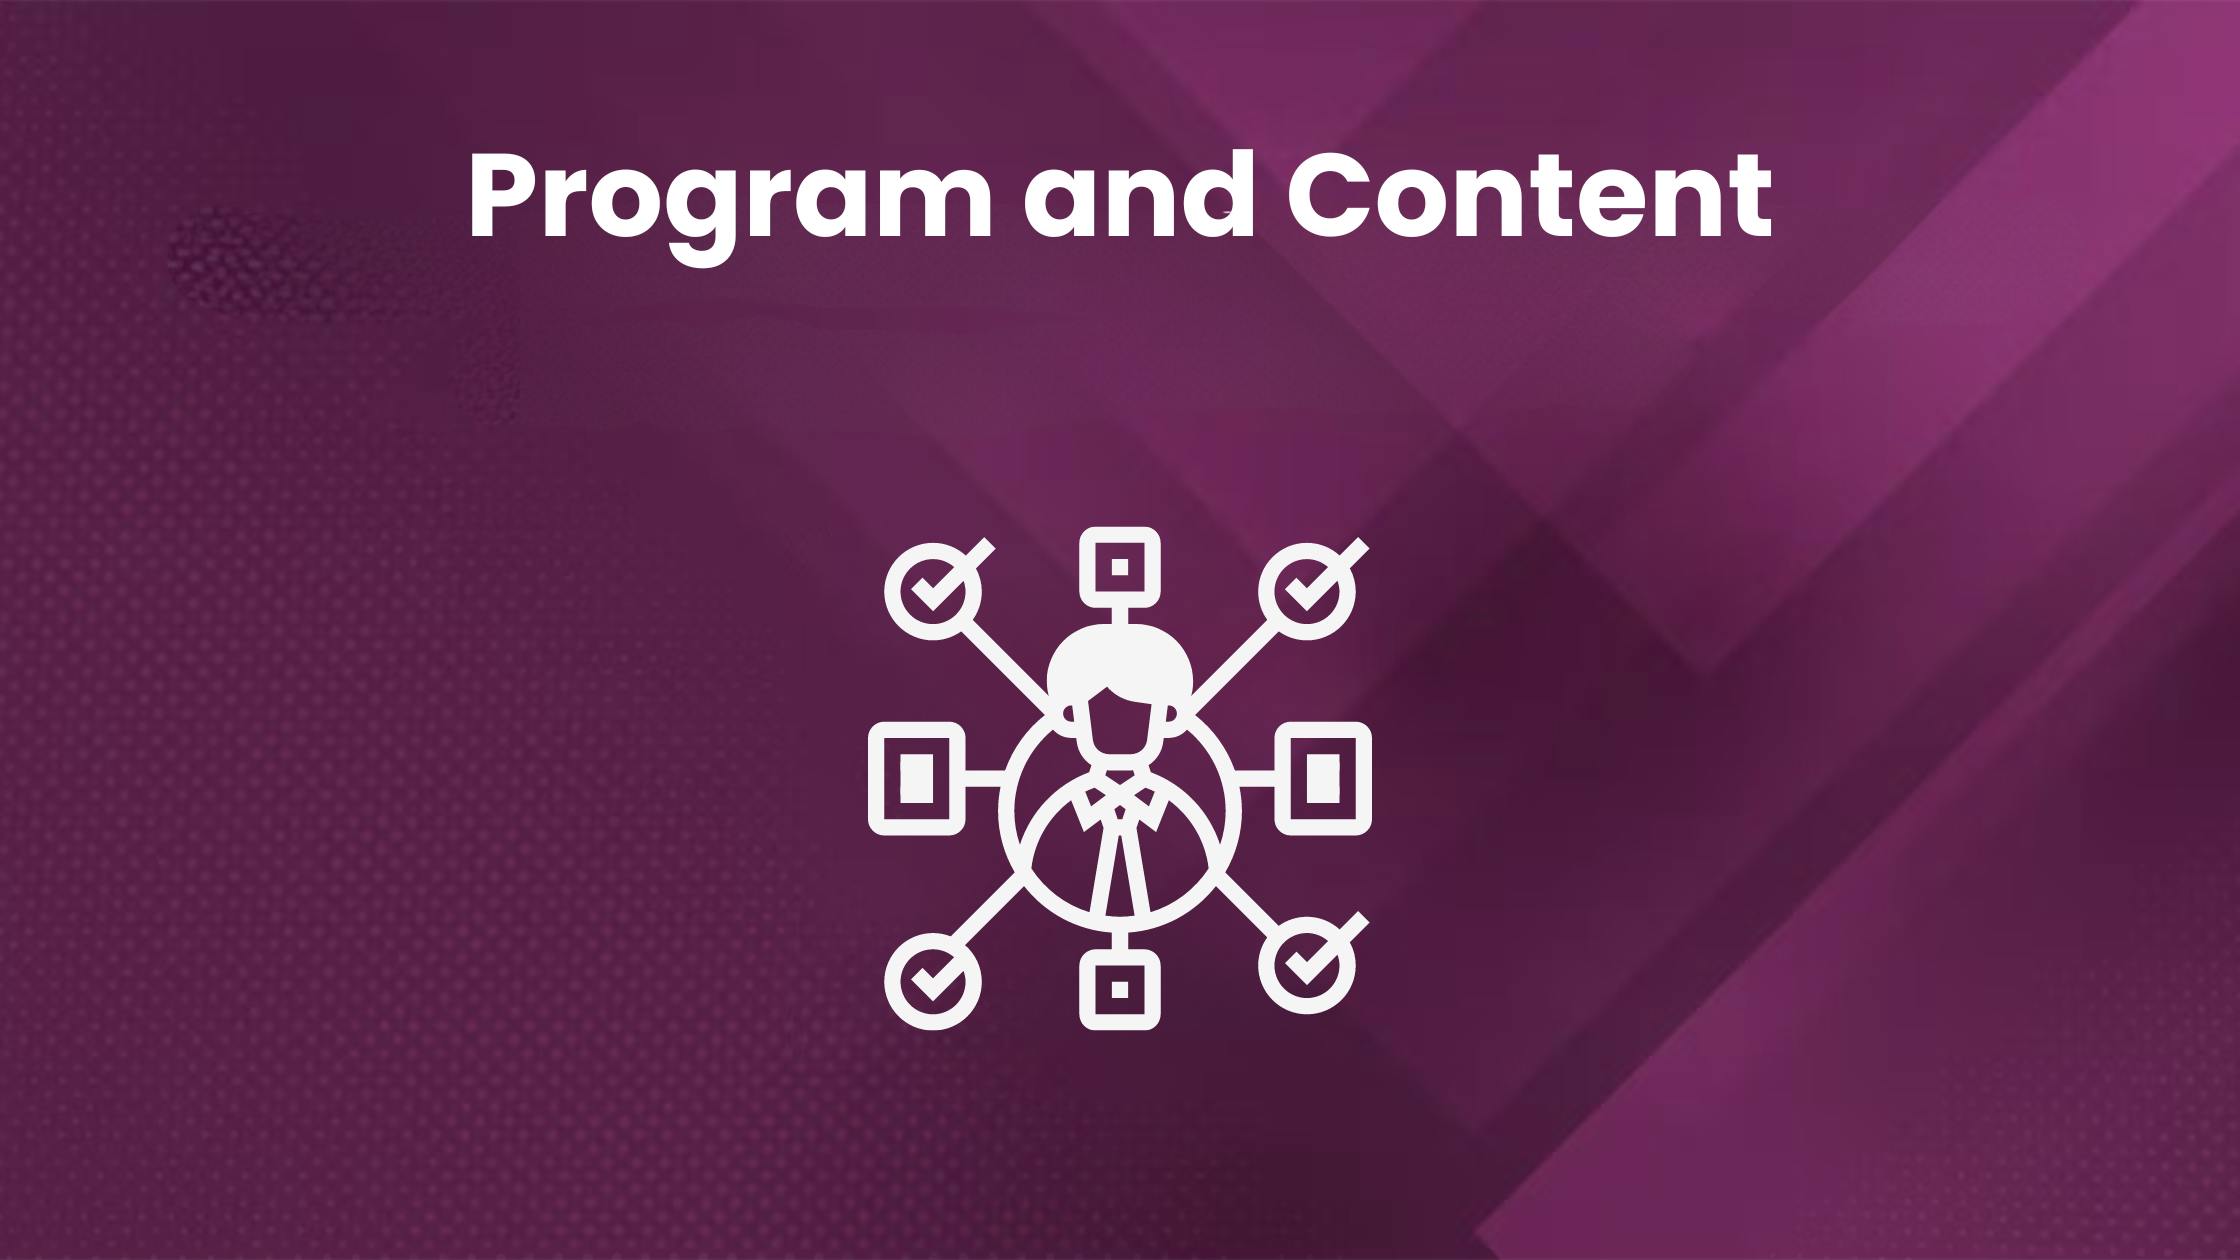 Program and content